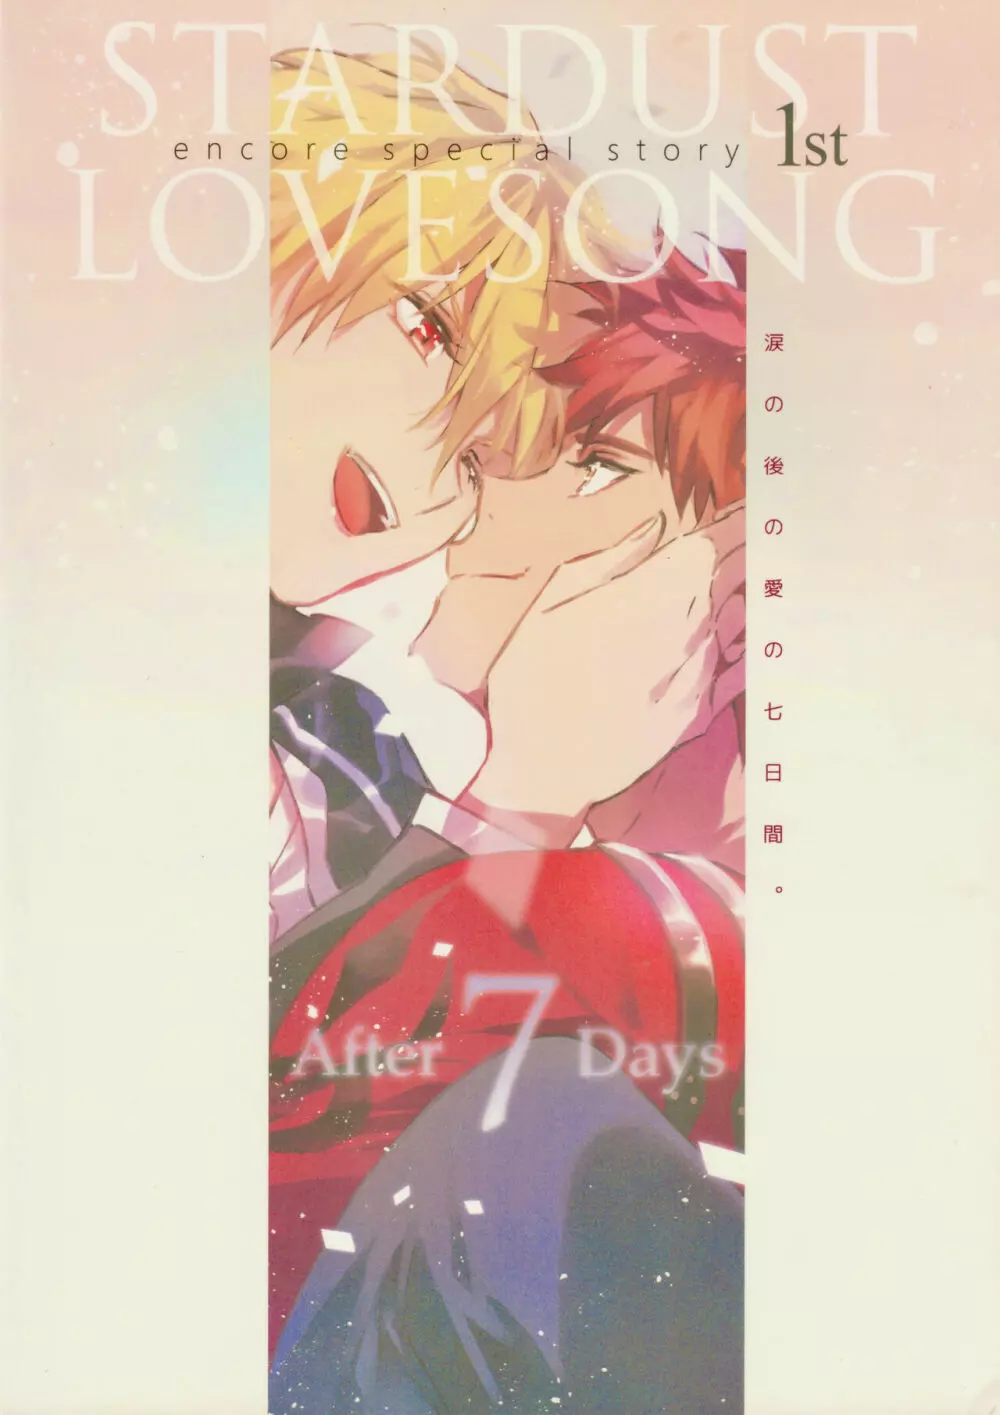 STARDUST LOVESONG encore special story 1st After 7 Days Page.60